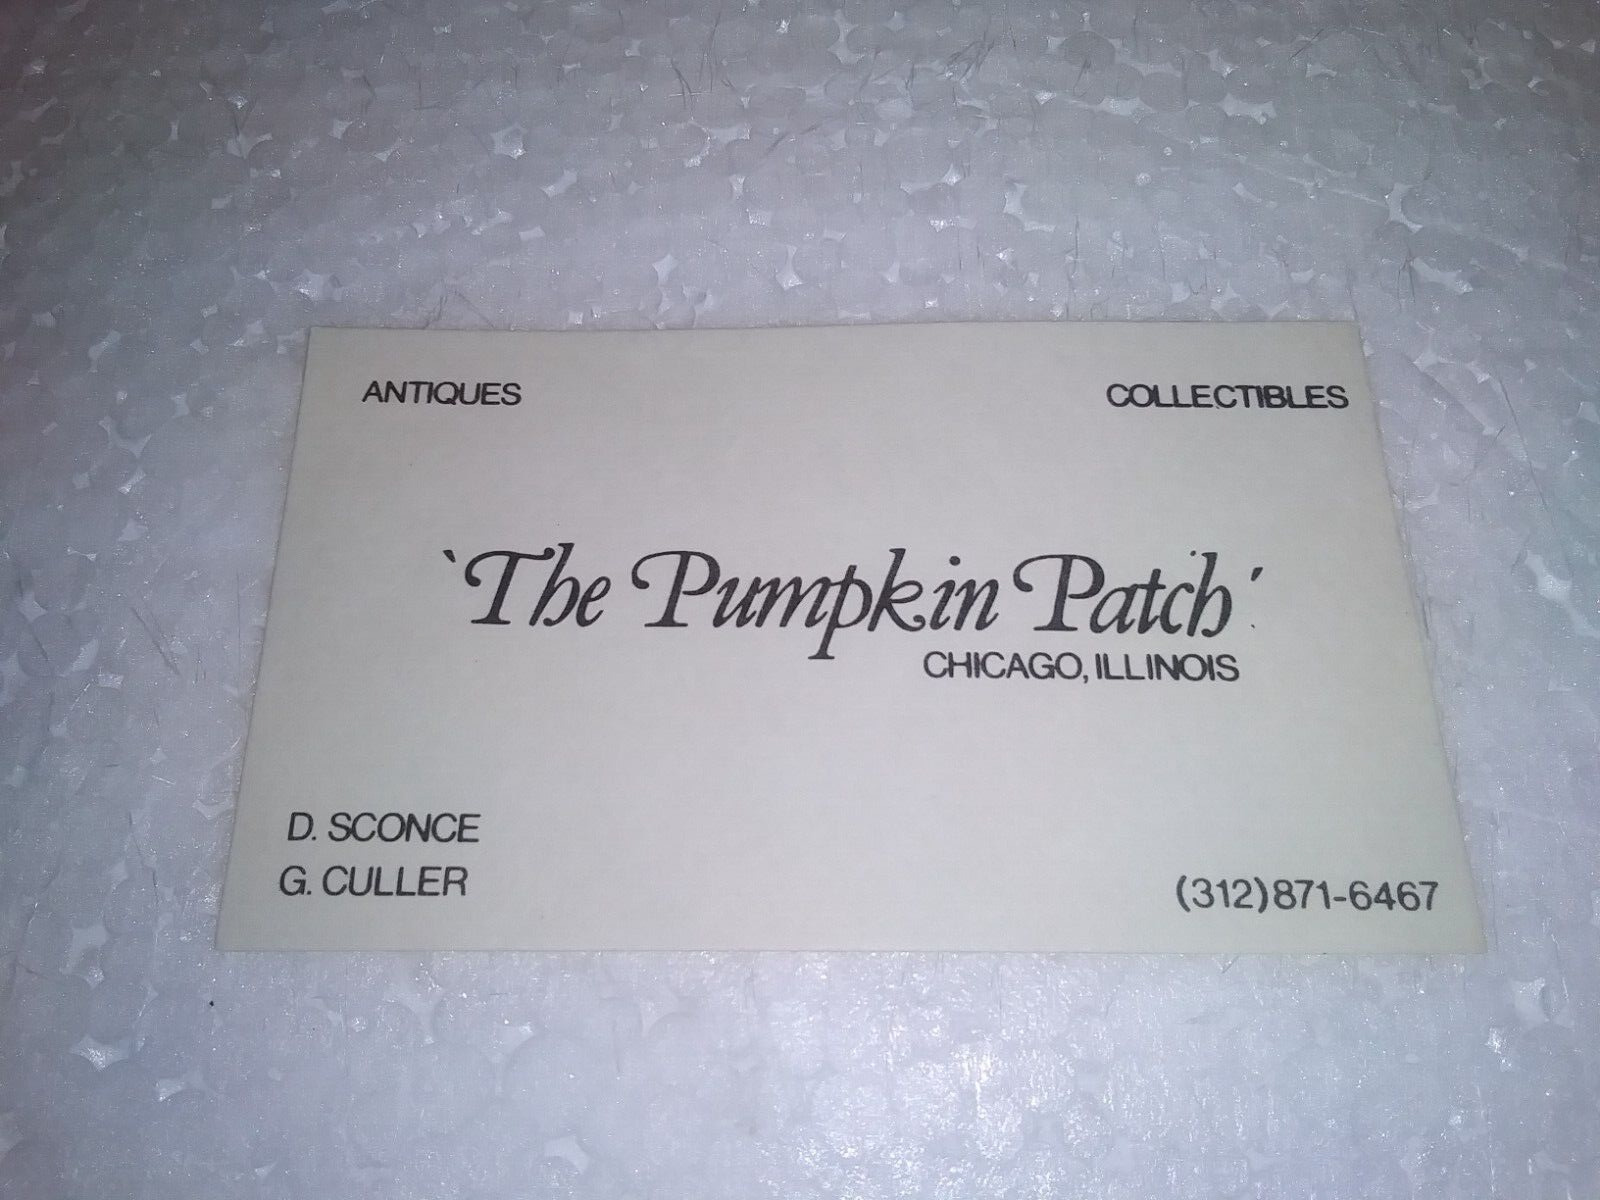 Vintage The Pumpkin Patch Antiques & Collectibles Chicago Illinois Business Card